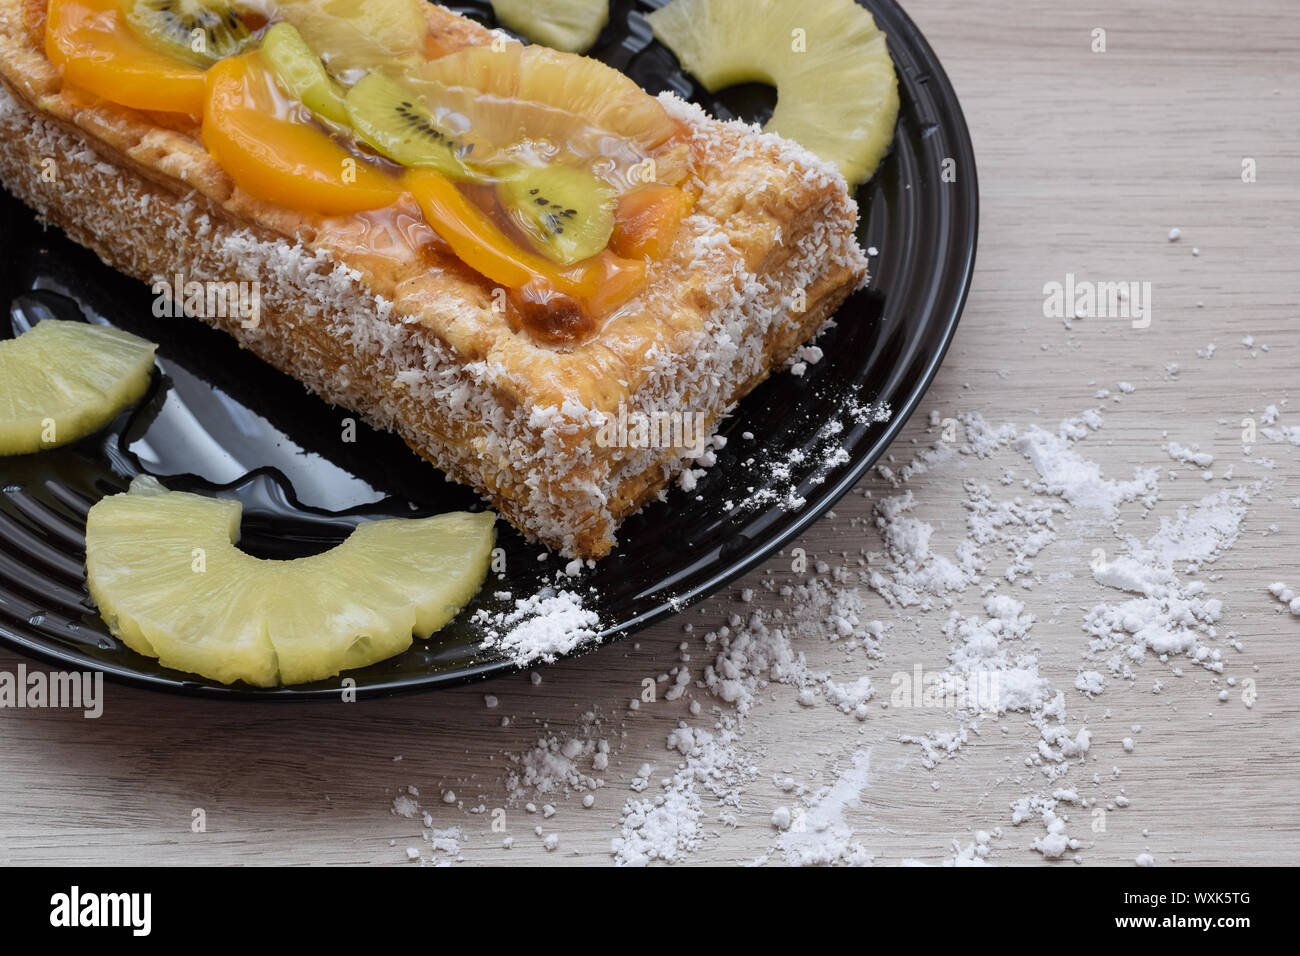 Dessert of puff pastry and fruits on a plate and sugar glass on the table Stock Photo